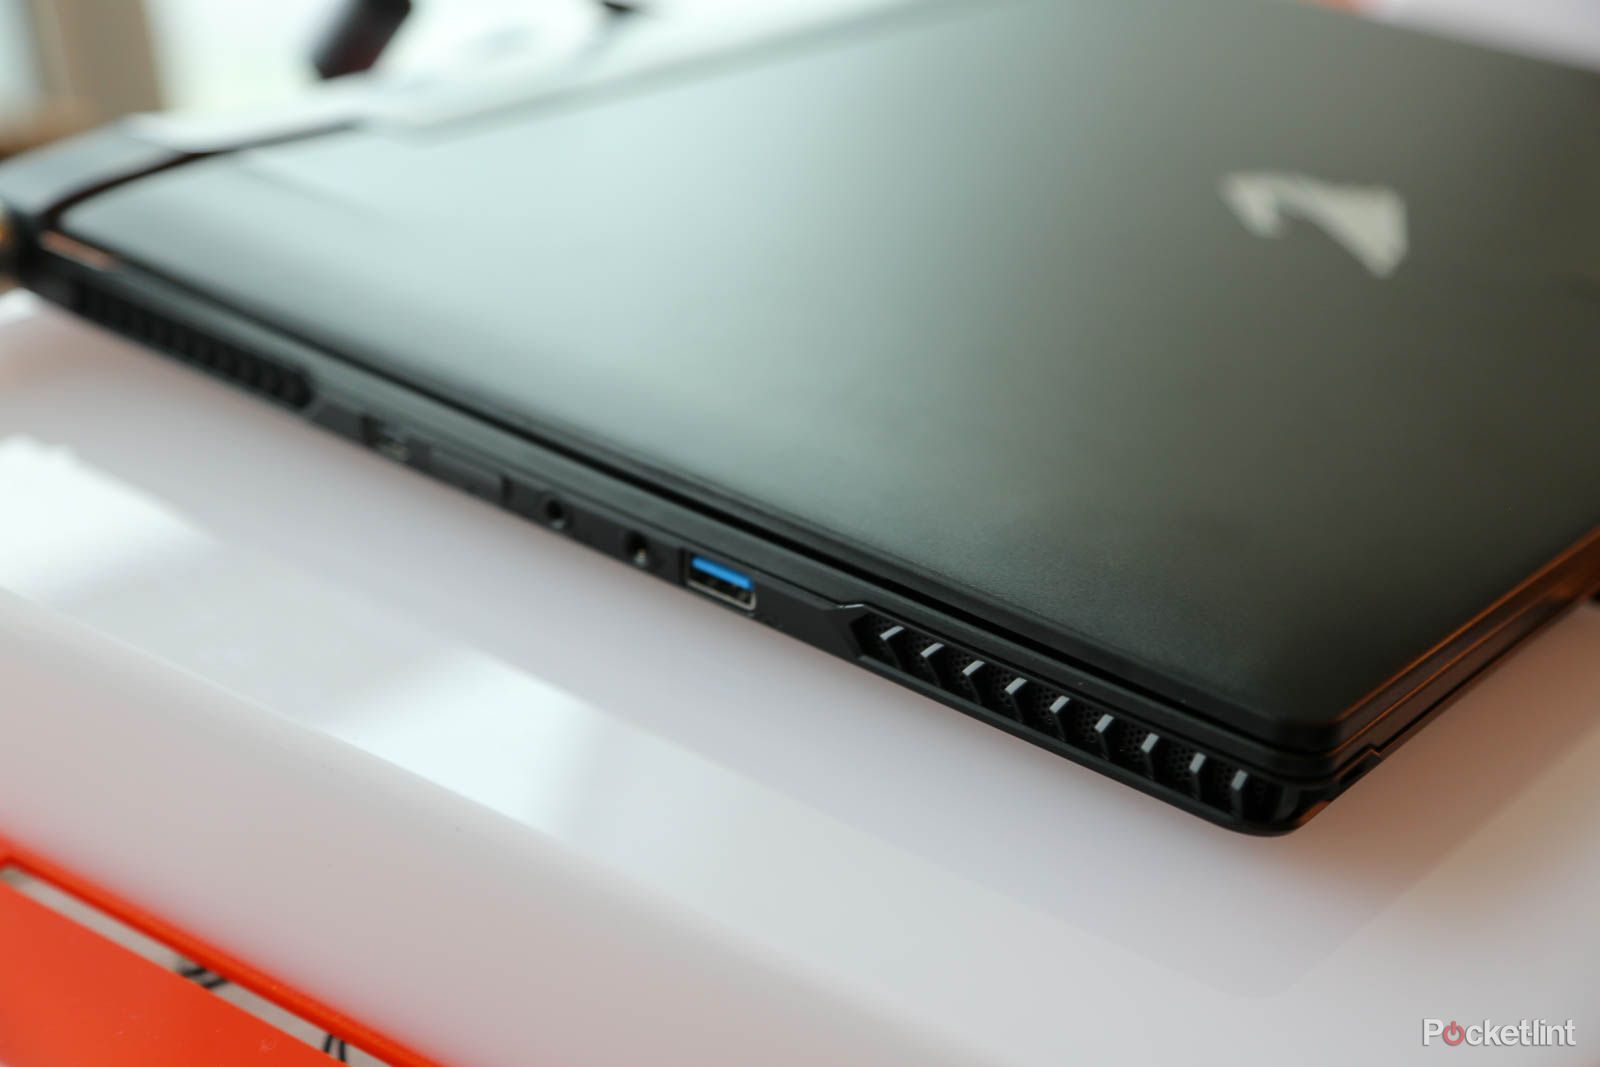 gigabyte s aorus x5 the most powerful 15 inch gaming laptop ever hands on image 5